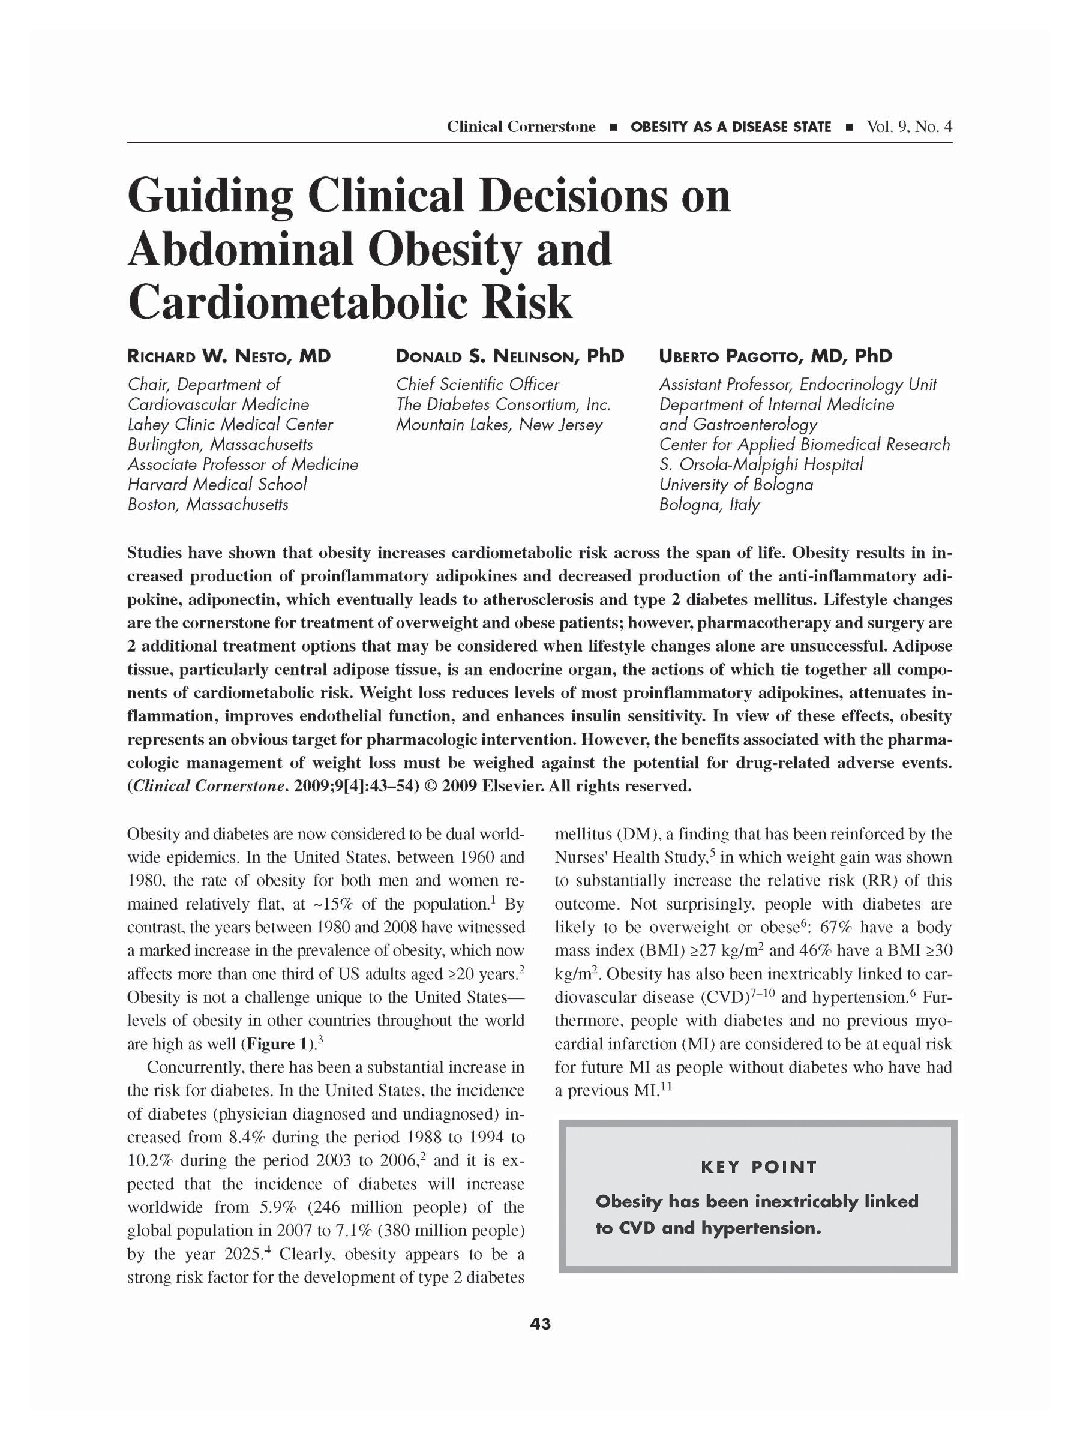 Guiding clinical decisions on abdominal obesity and cardiometabolic risk